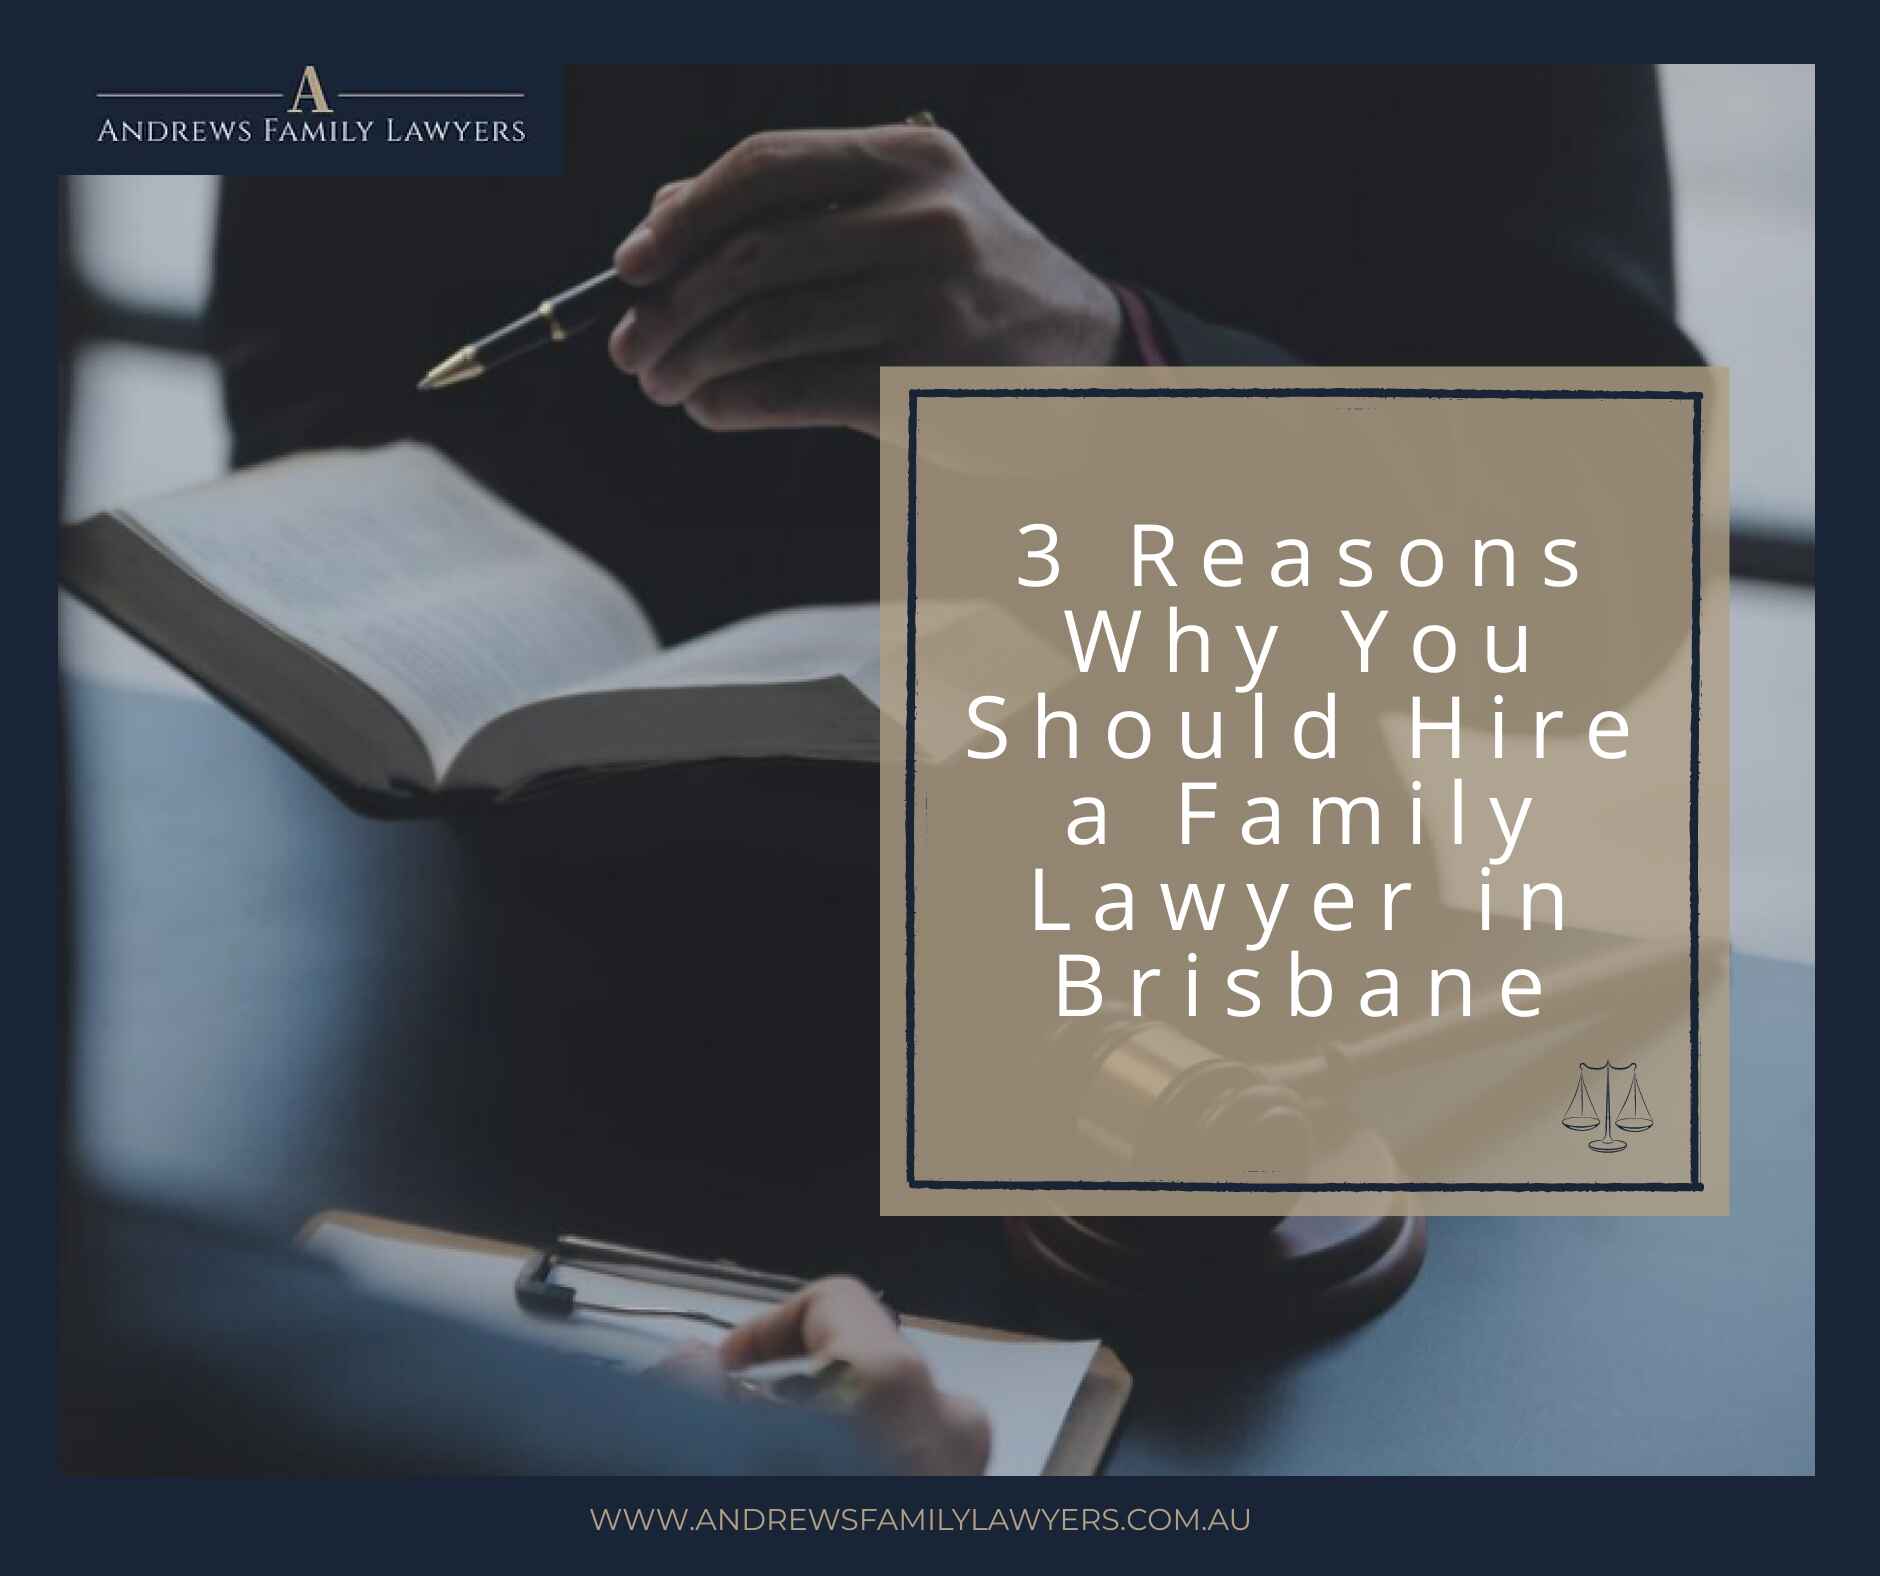 3 Reasons Why You Should Hire a Family Lawyer in Brisbane